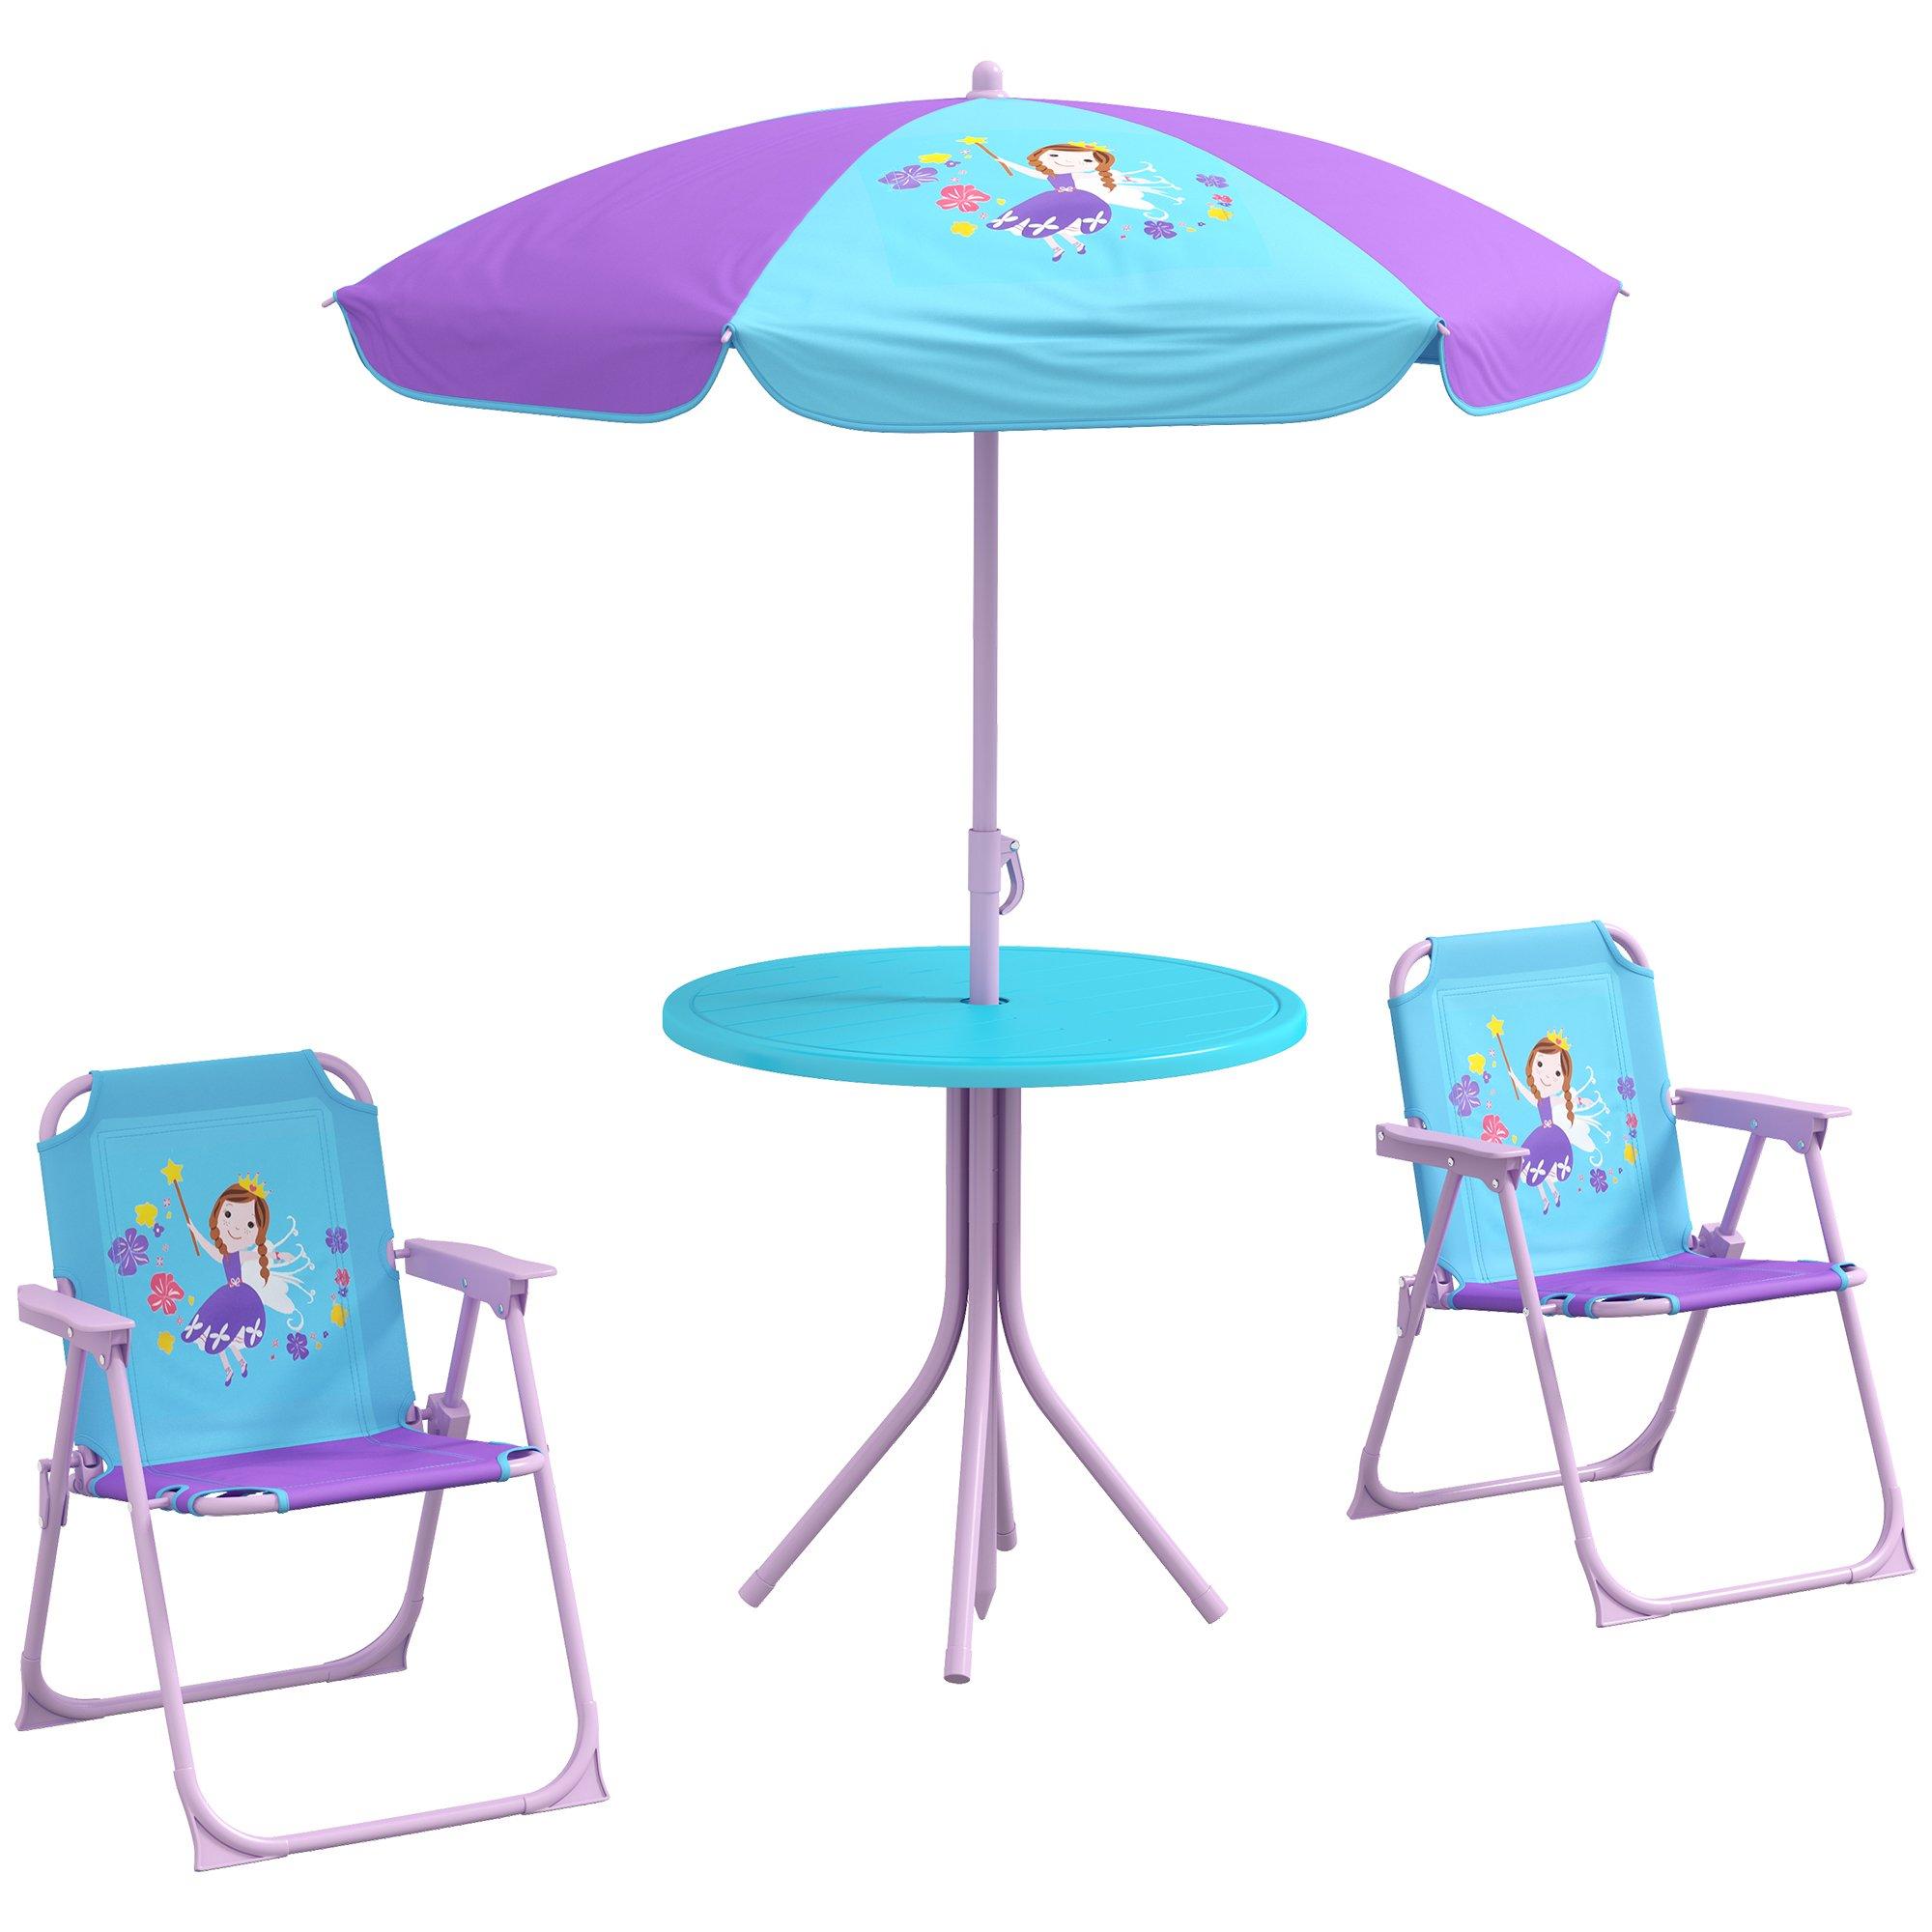 Children Table and Chair Set Outdoor Garden Furniture Set w/ Fairy Theme